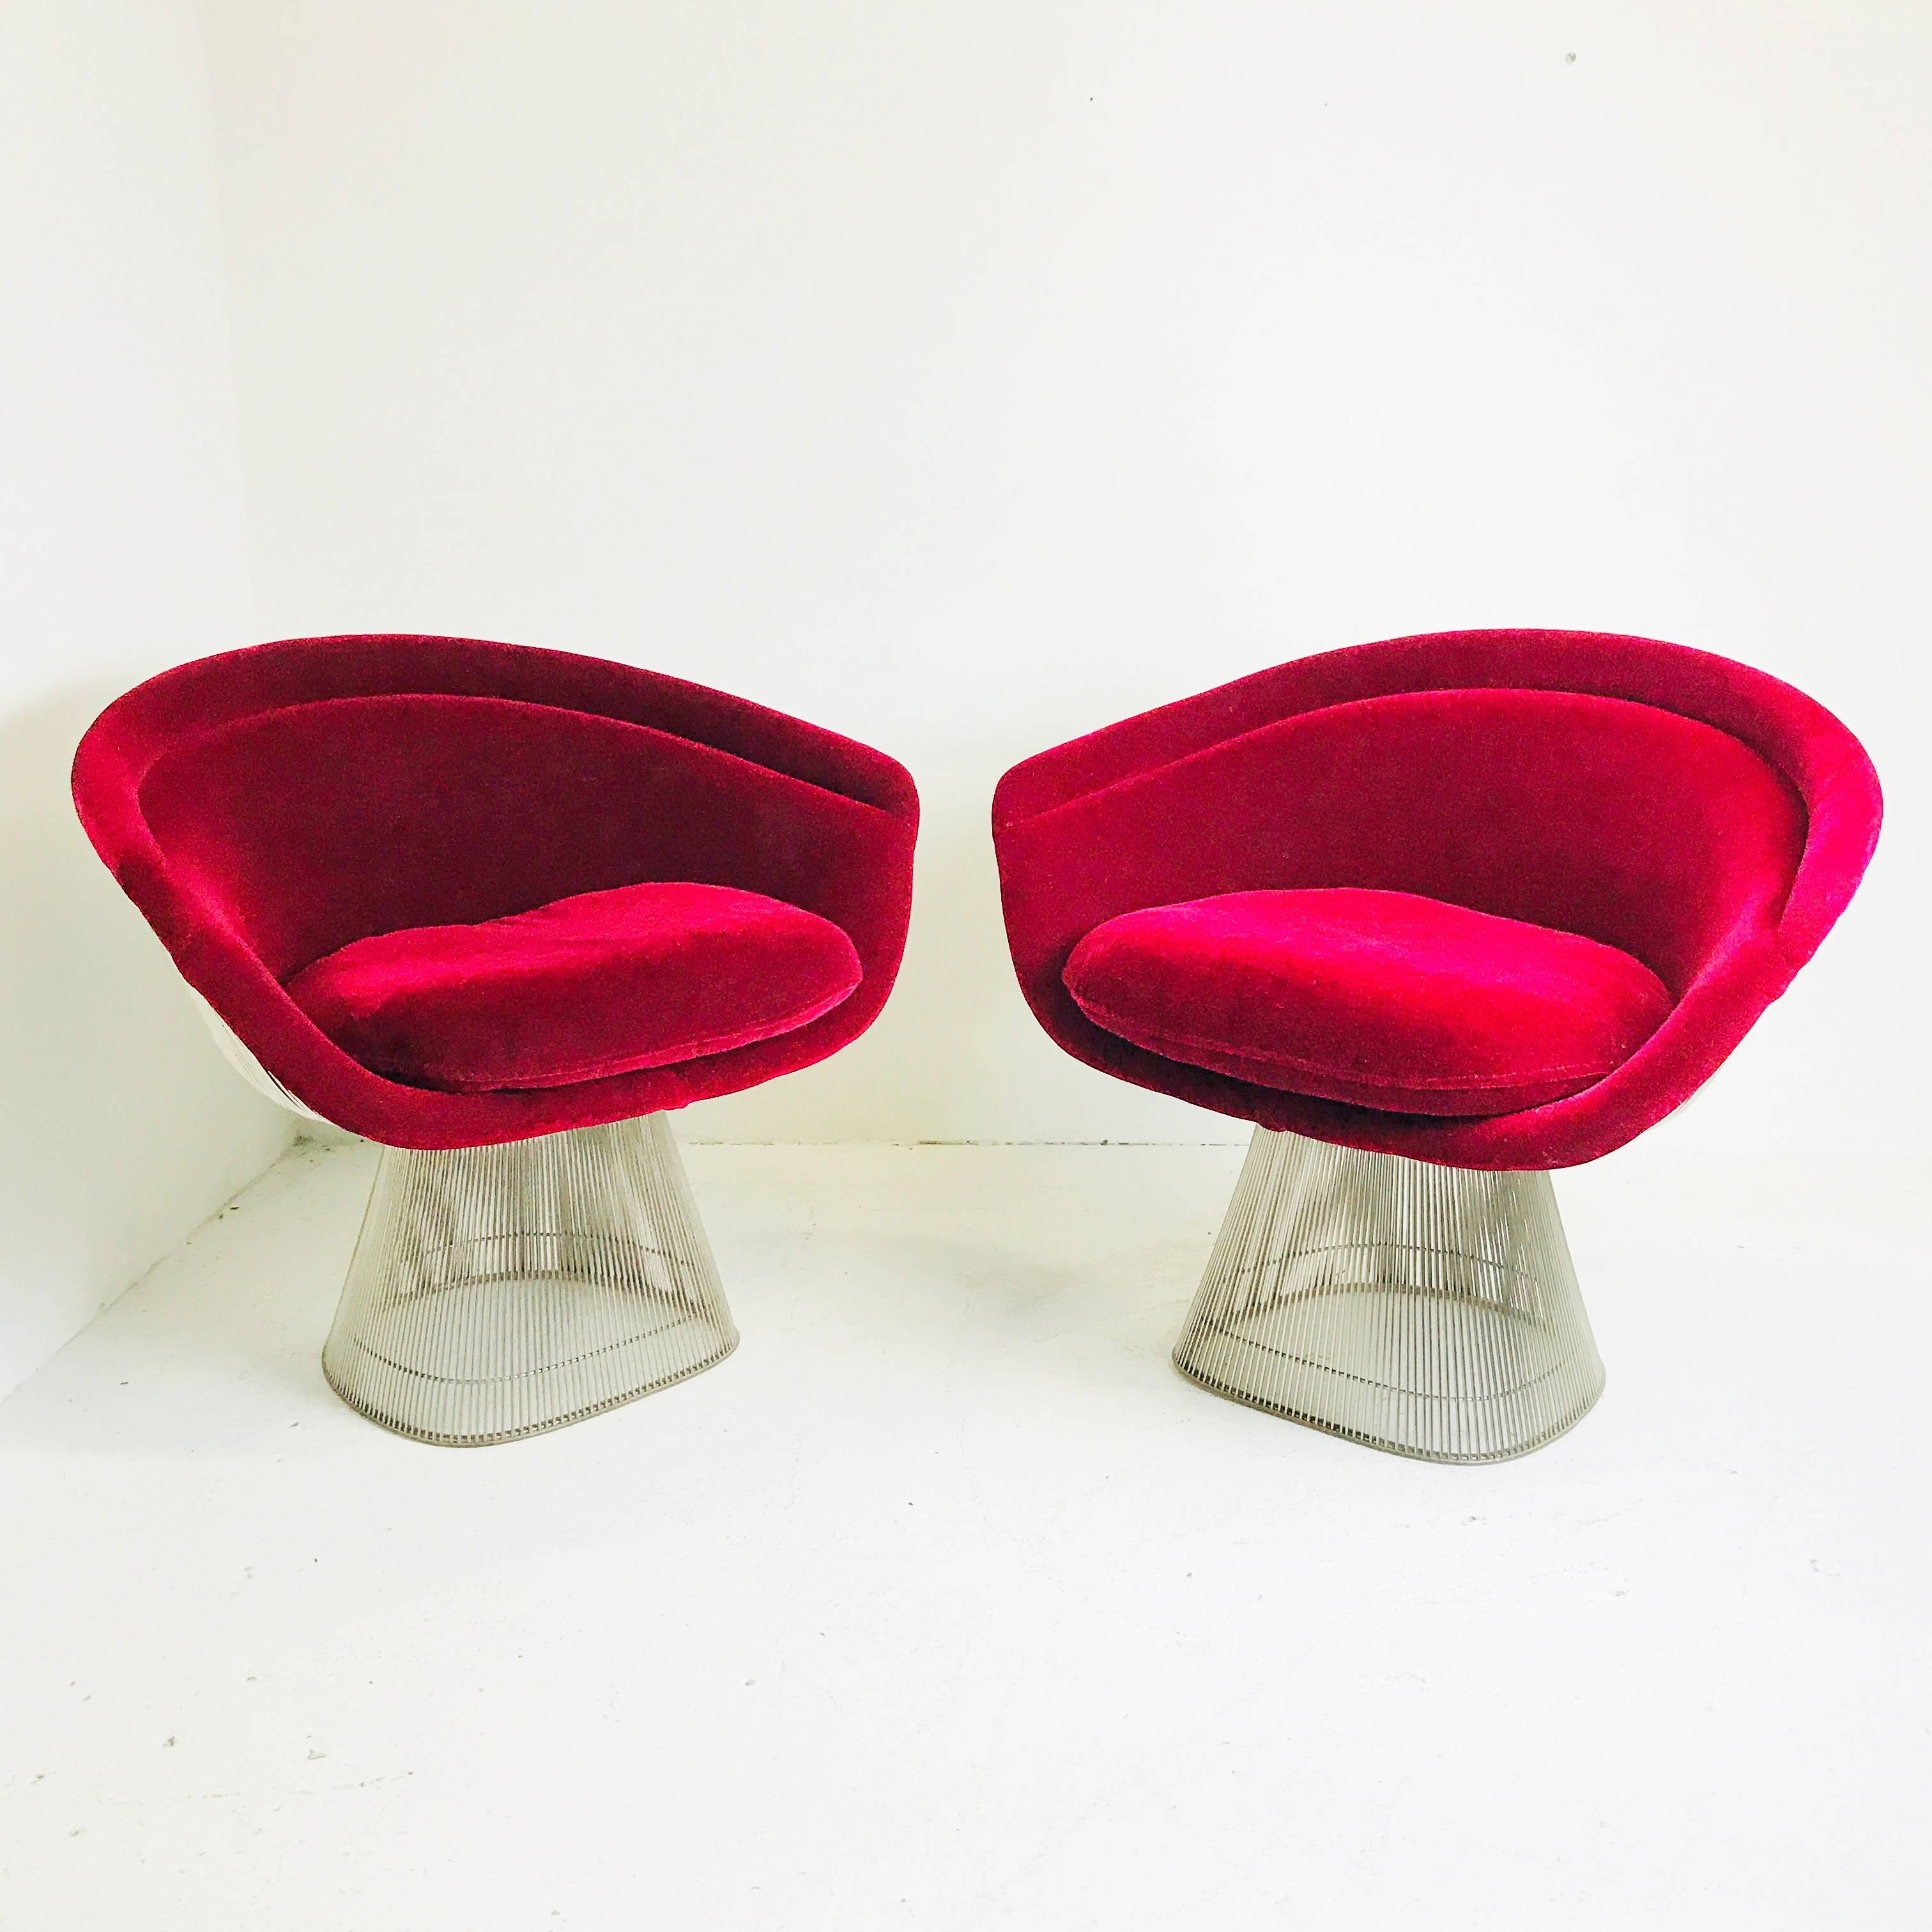 Pair of raspberry velvet Warren Platner lounge chairs. Chairs are in good clean condition with minimal wear.

Dimensions: 32